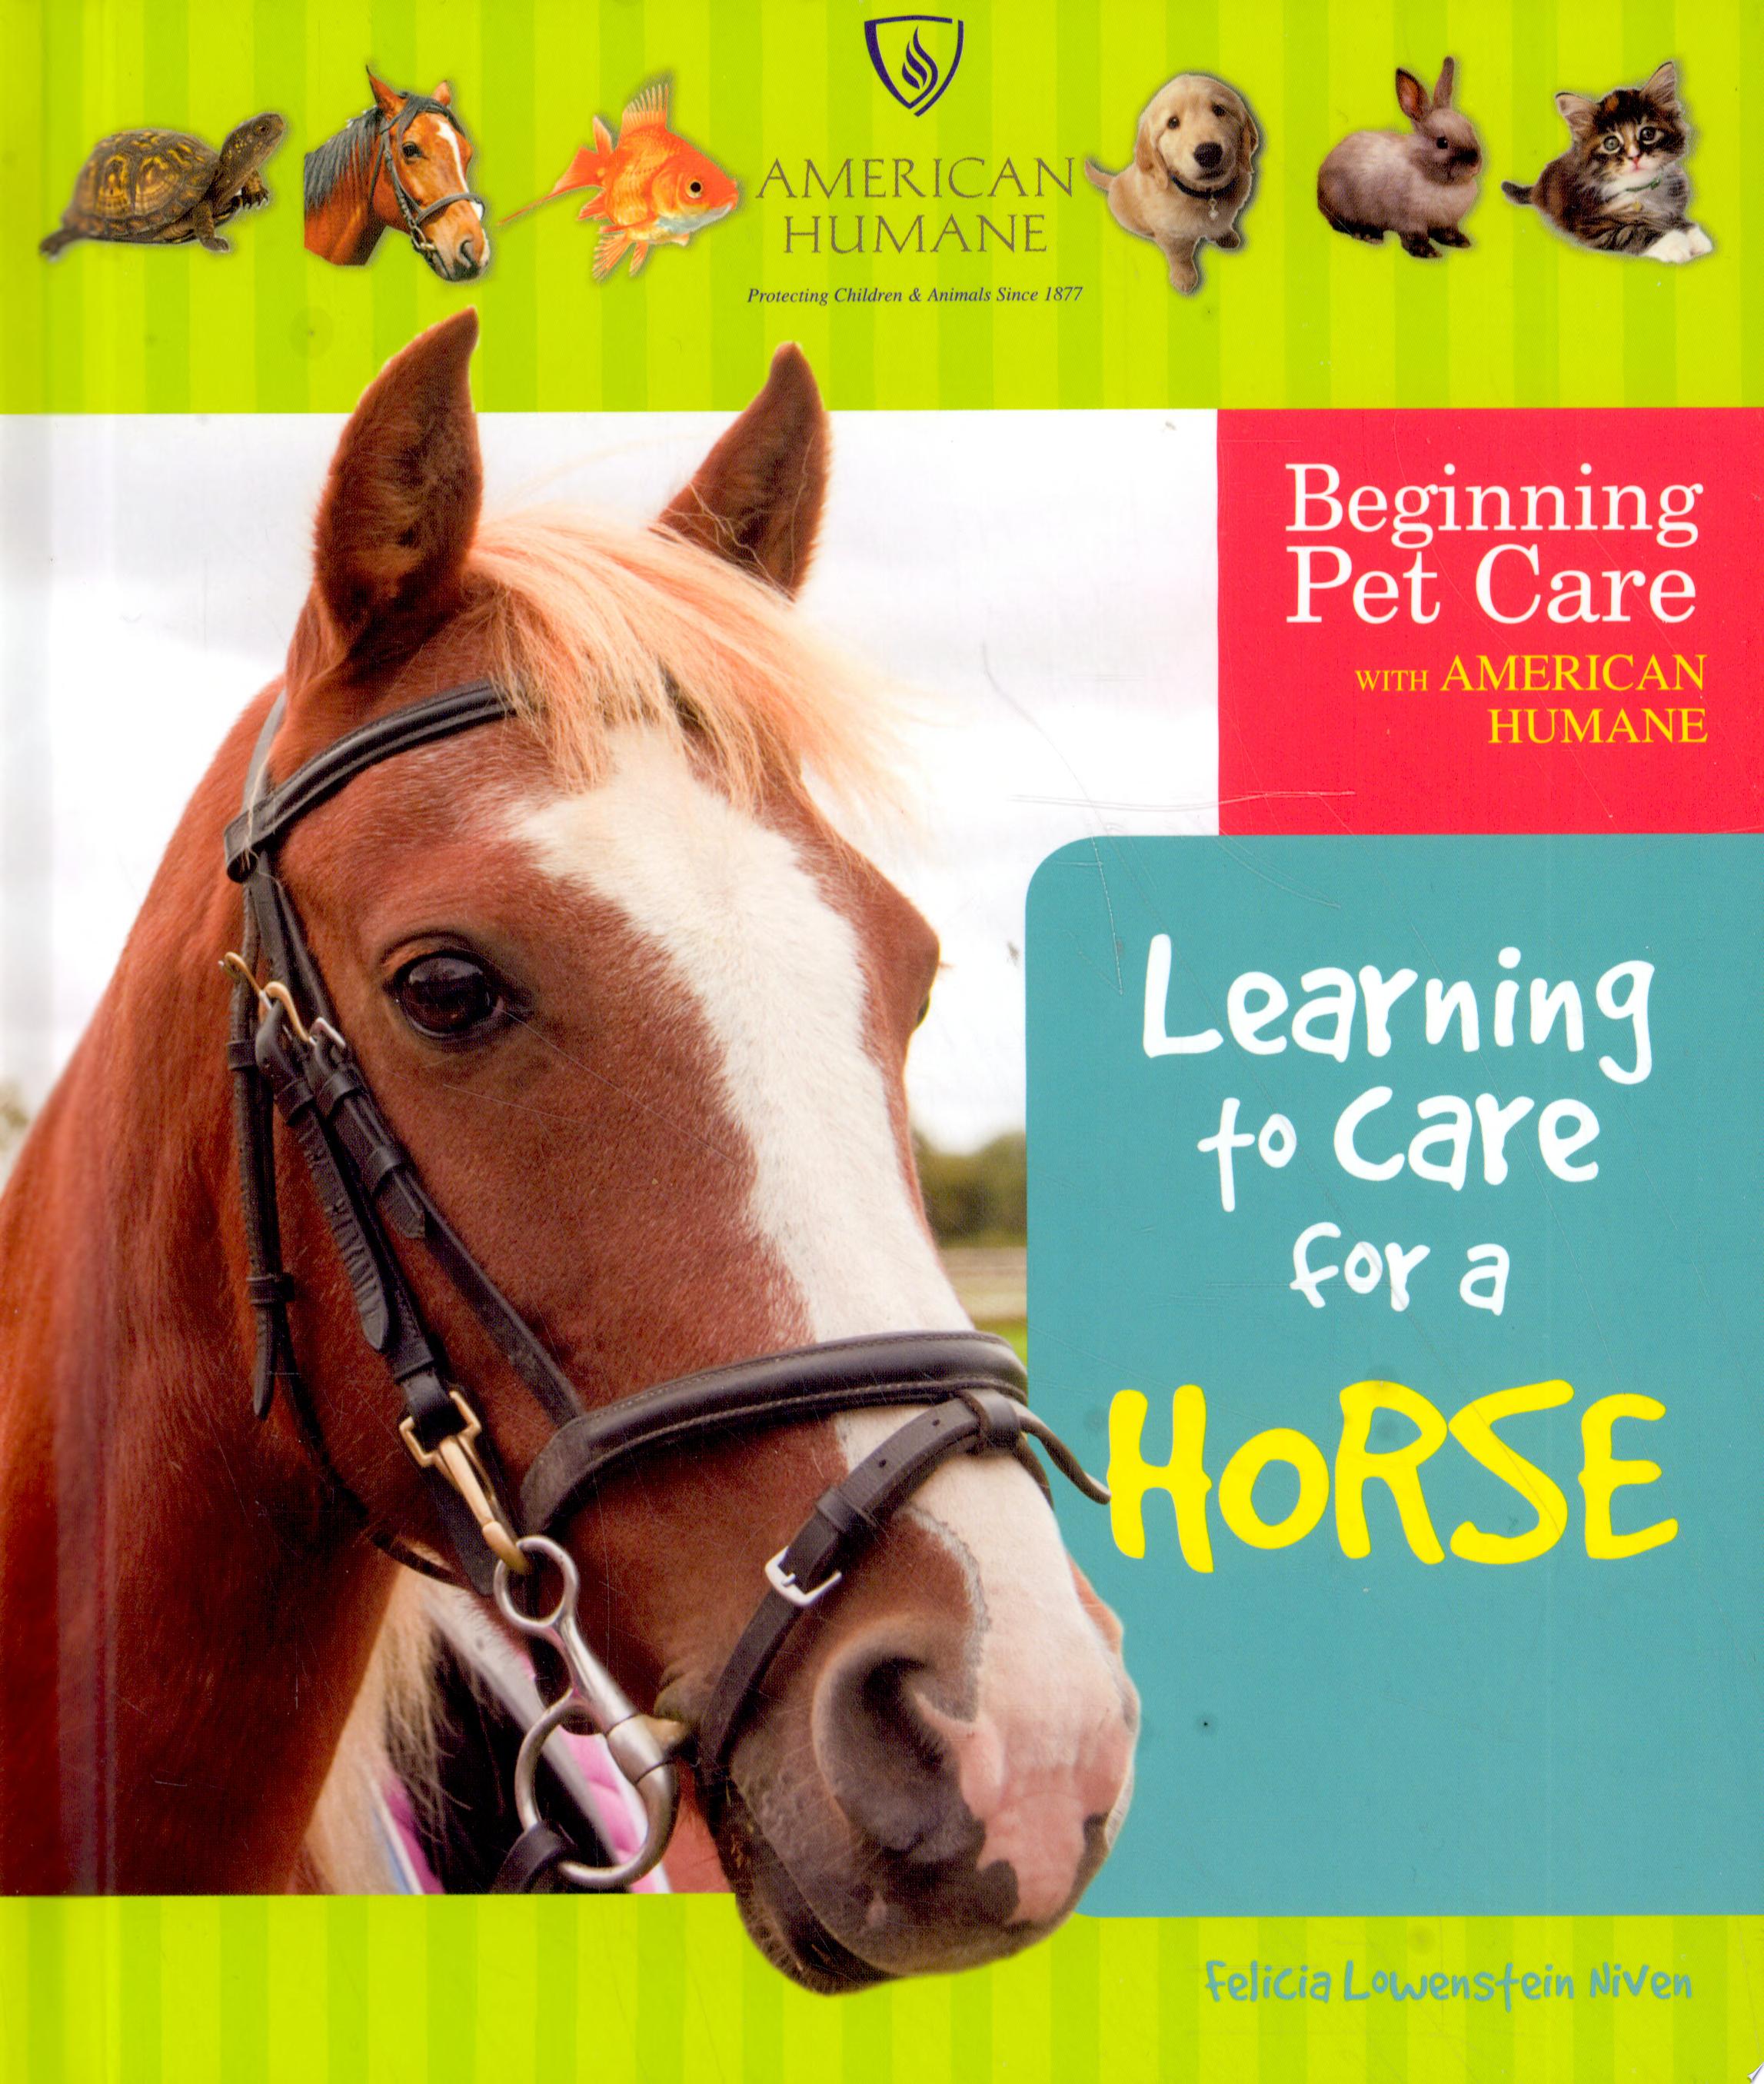 Image for "Learning to Care for a Horse"